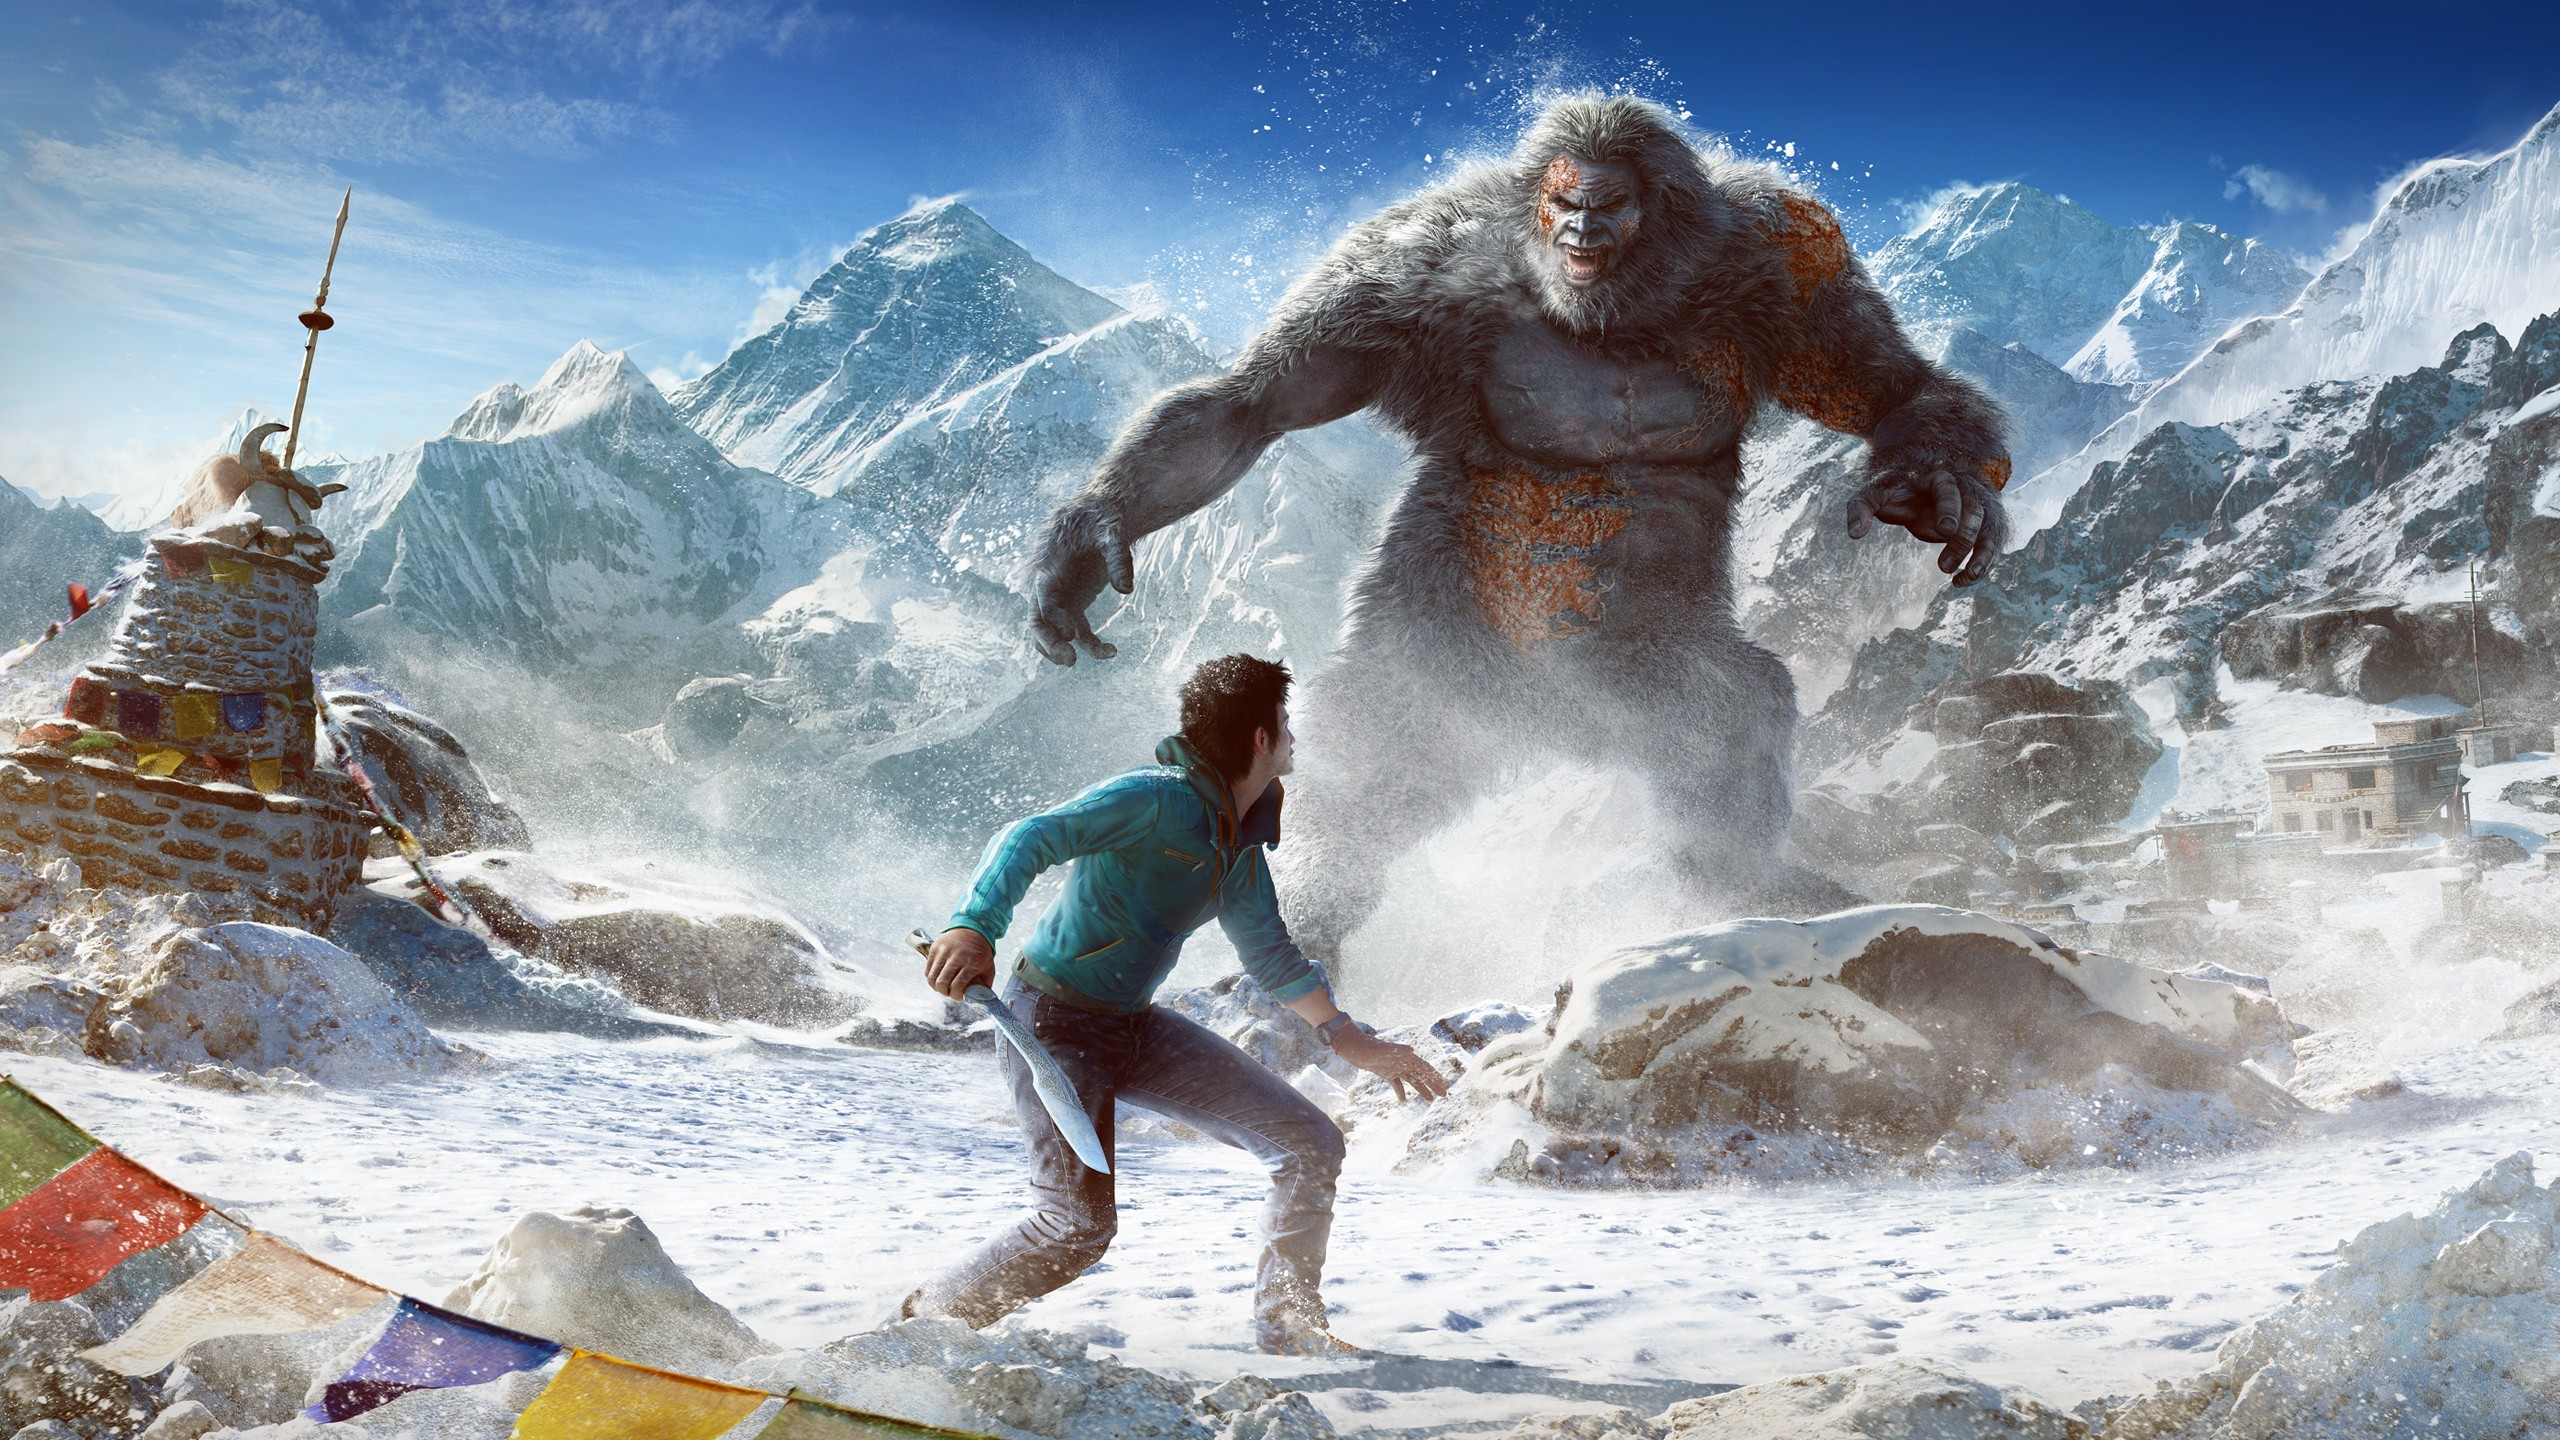 far_cry_4_valley_of_the_yetis-2560x1440.jpg